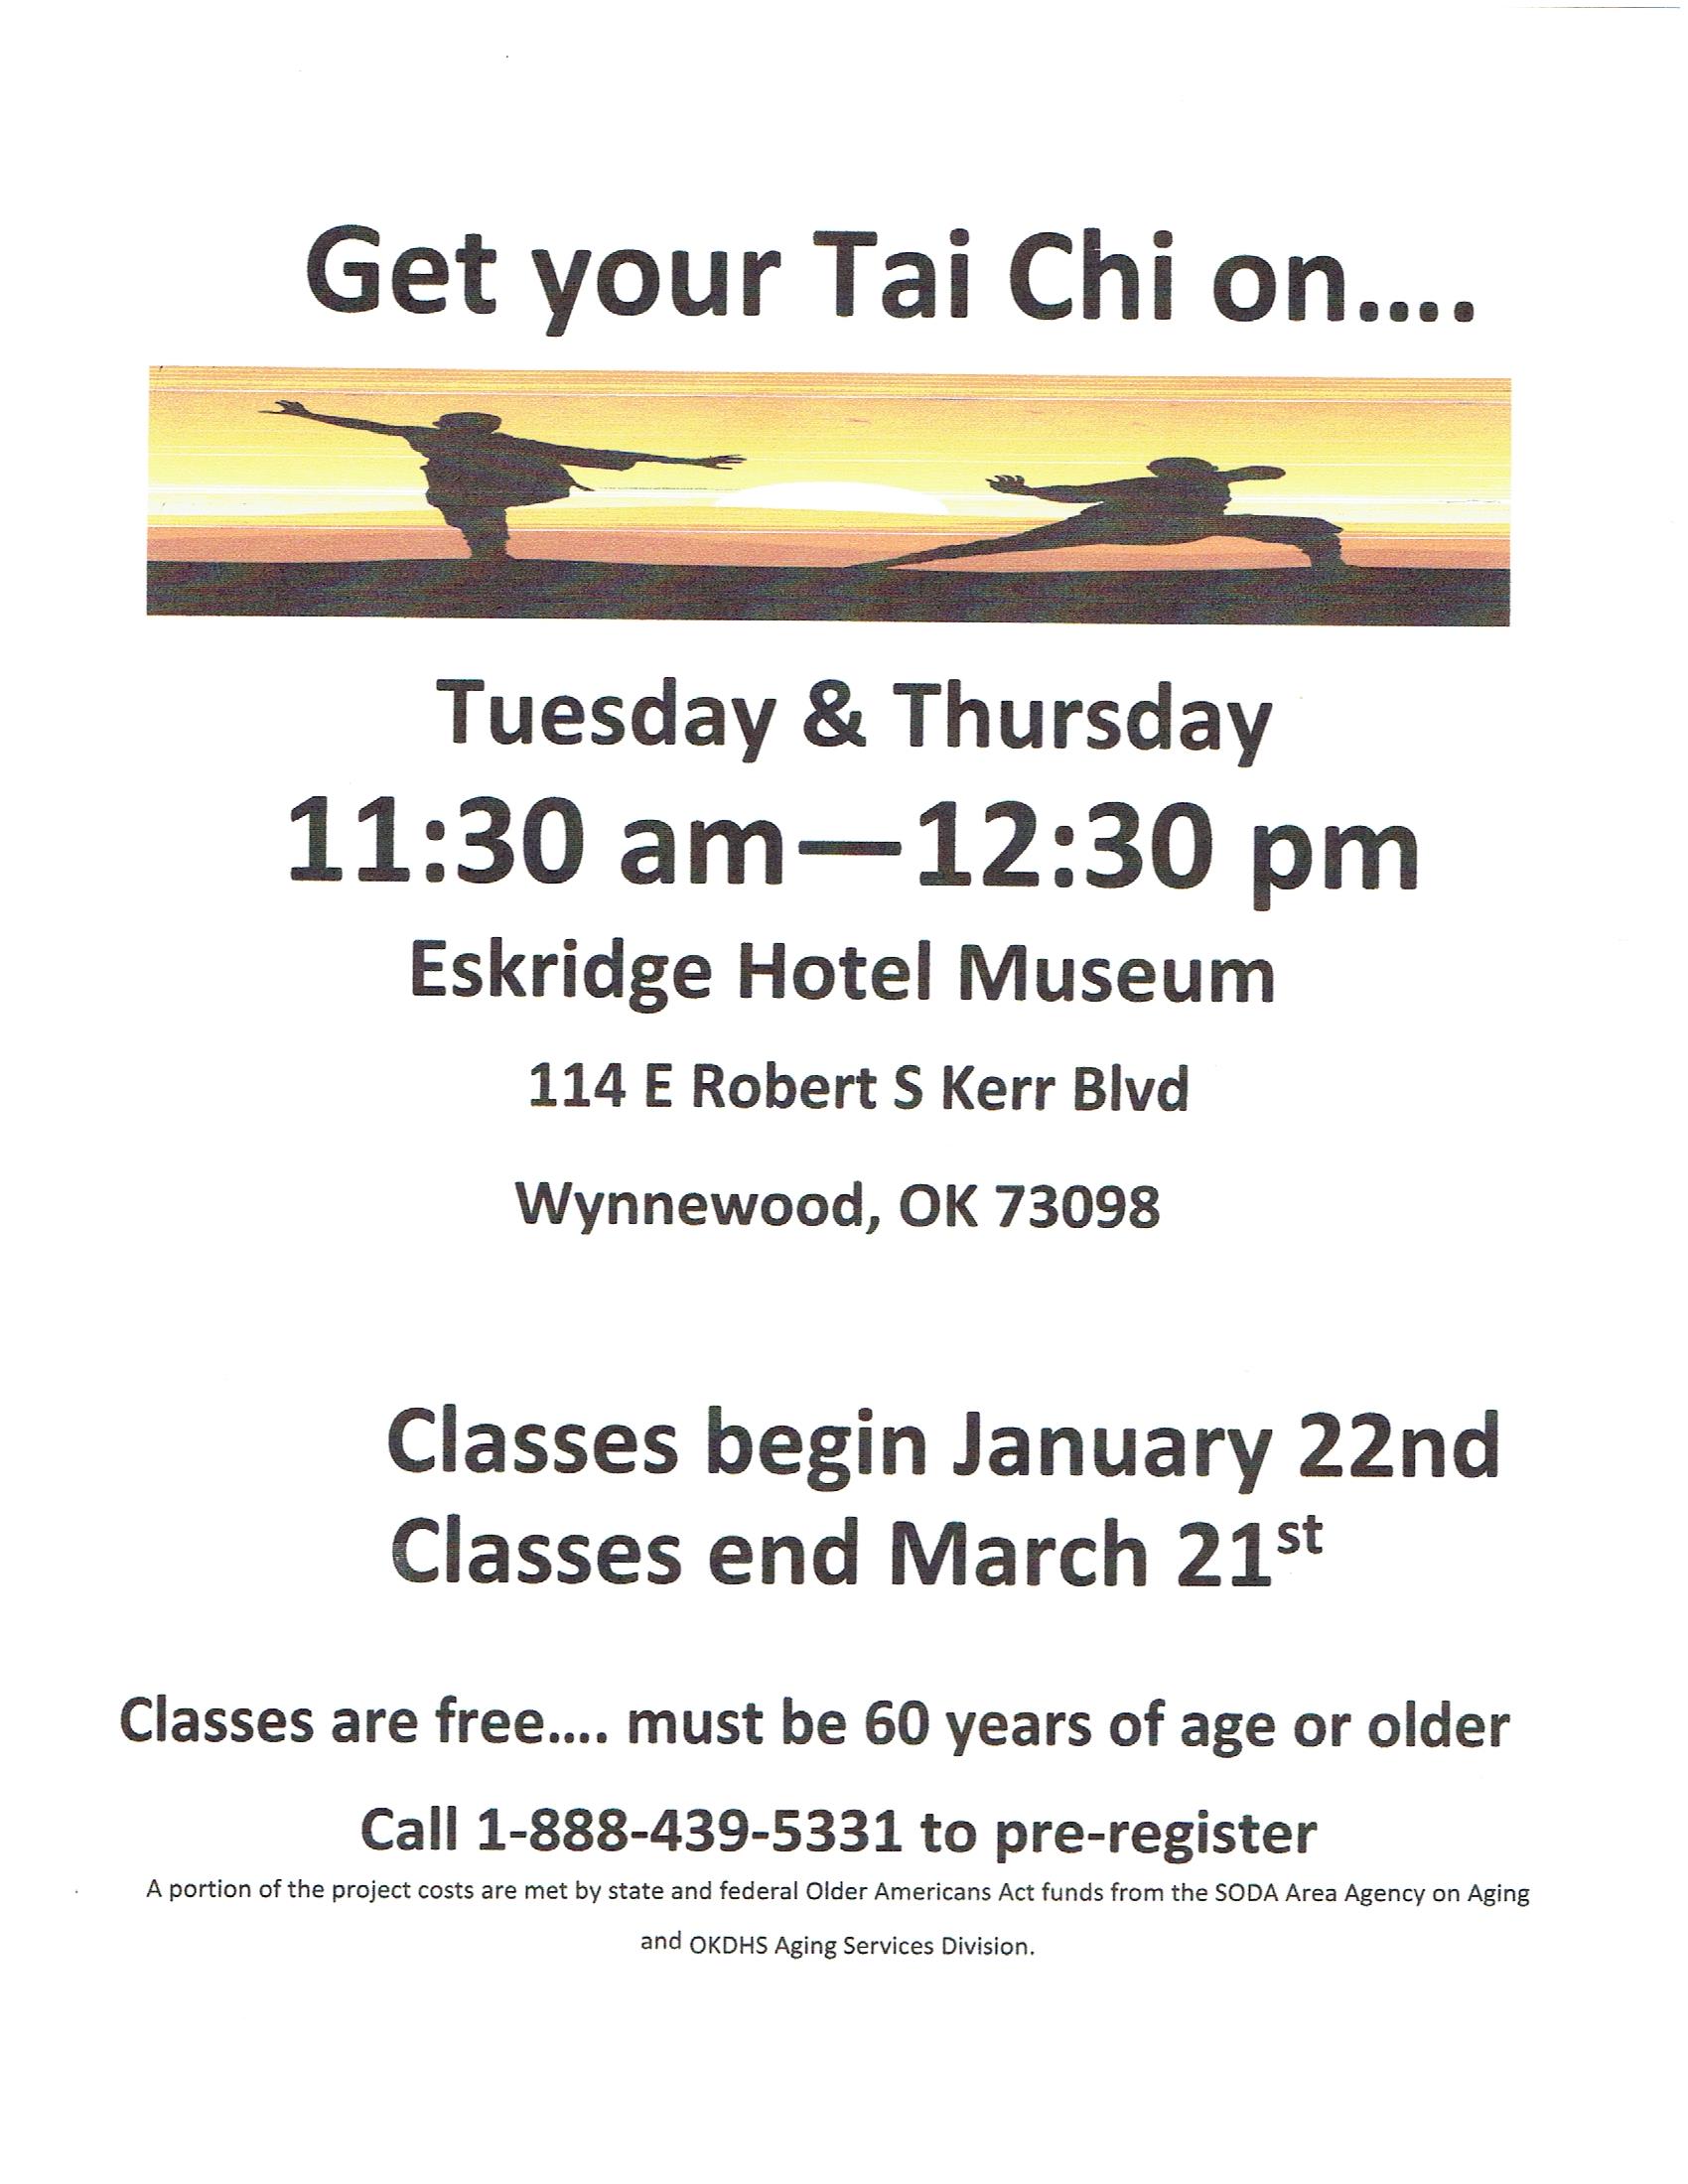 get you tai chi on tuesday and thursday 11:30 to 12:30 at the Eskridge hotel museum classes begin january 22nd classes end march 21st classes are free must be 60 years of age or older call 1-888-439-5331 to pre-register